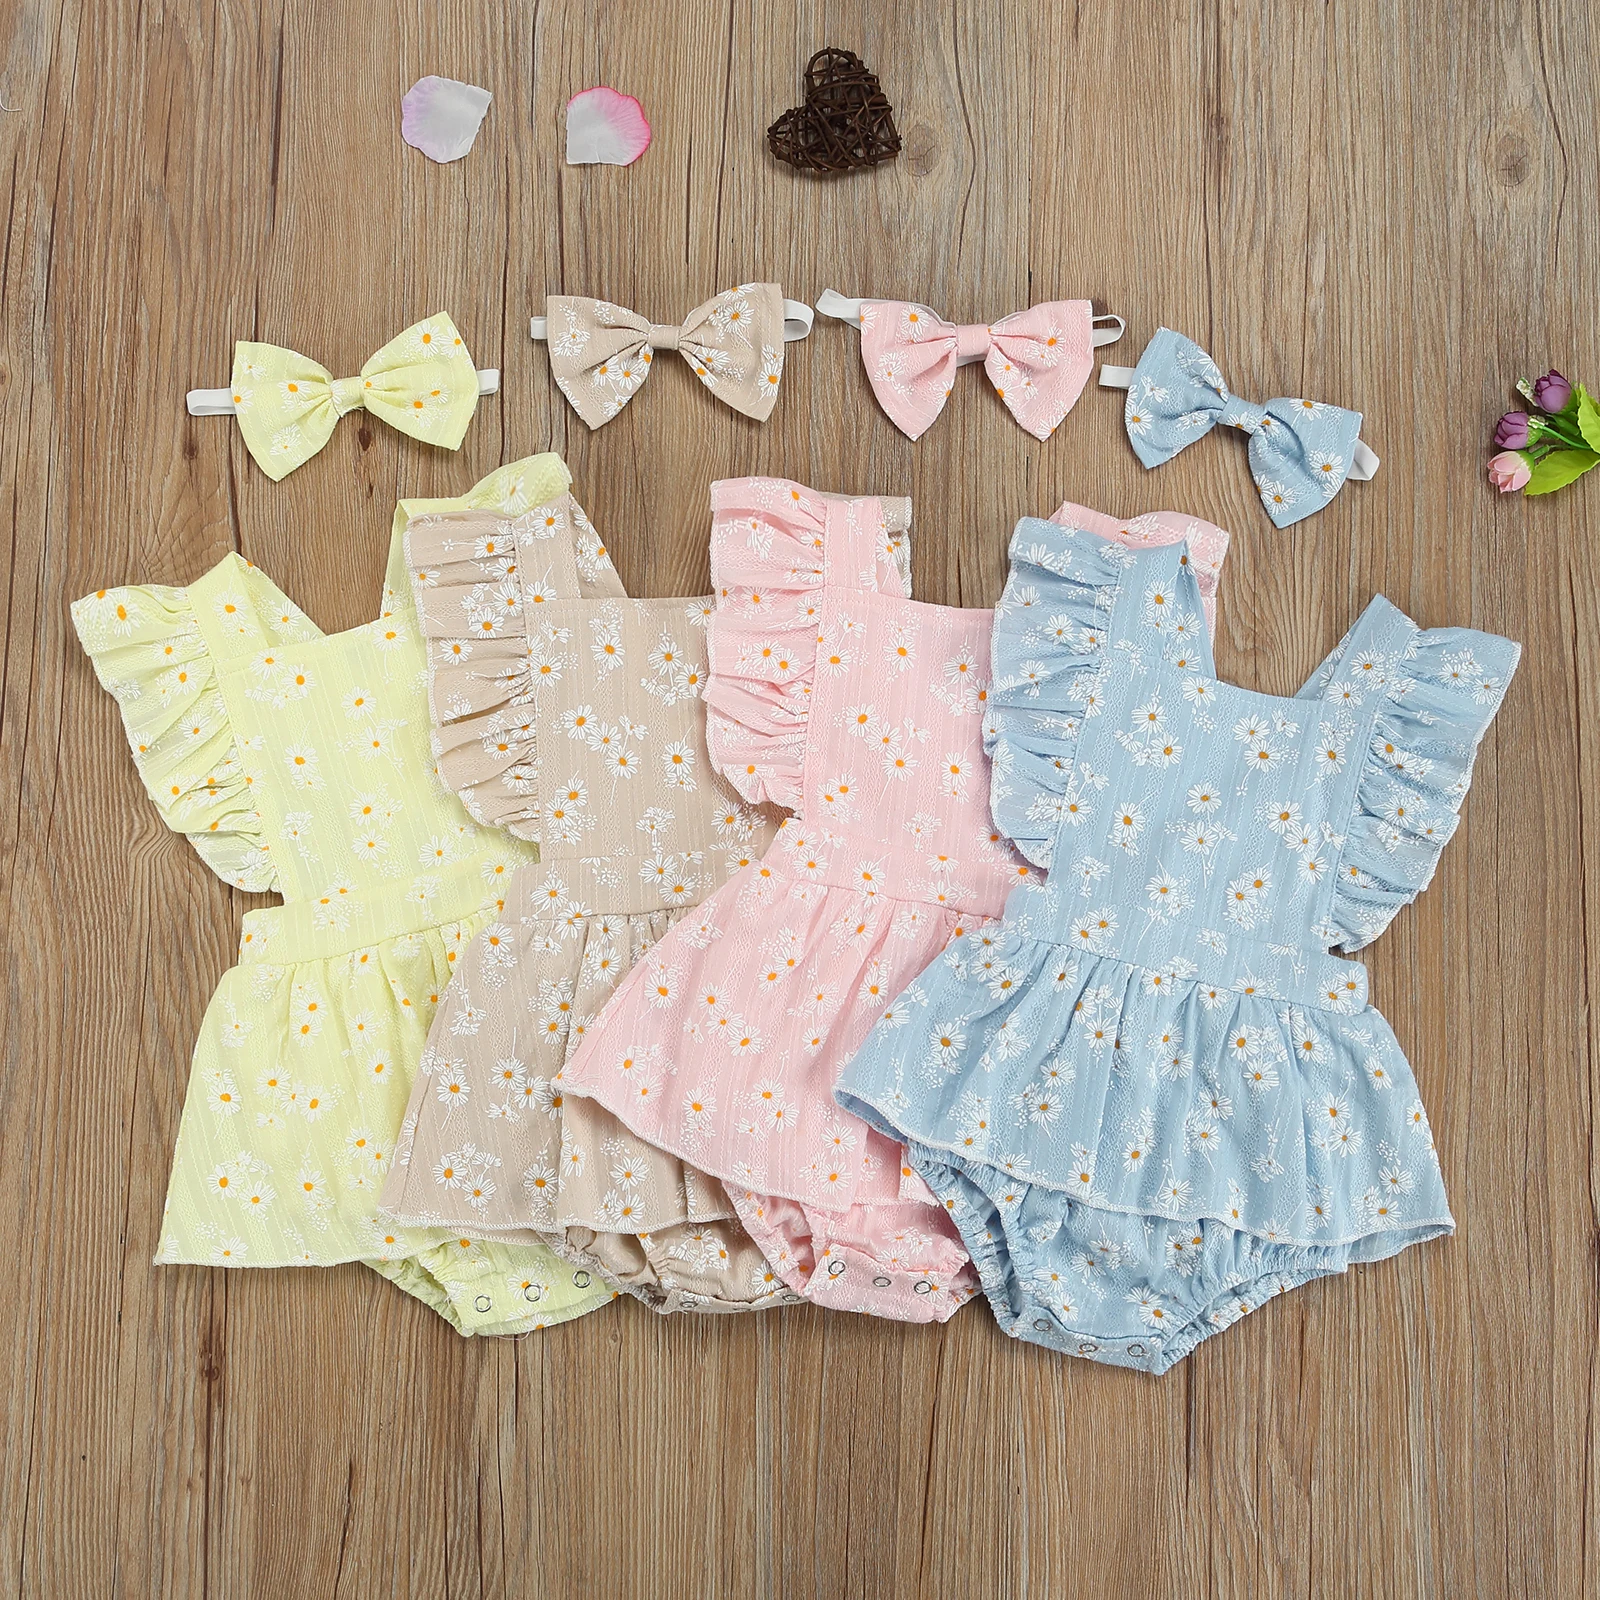 

OPPERIAYA Summer Bodysuit with Headband Daisy Print Square Collar Ruffle Fly Sleeve Bodysuit Hairband for Baby Girls 0-24 Months